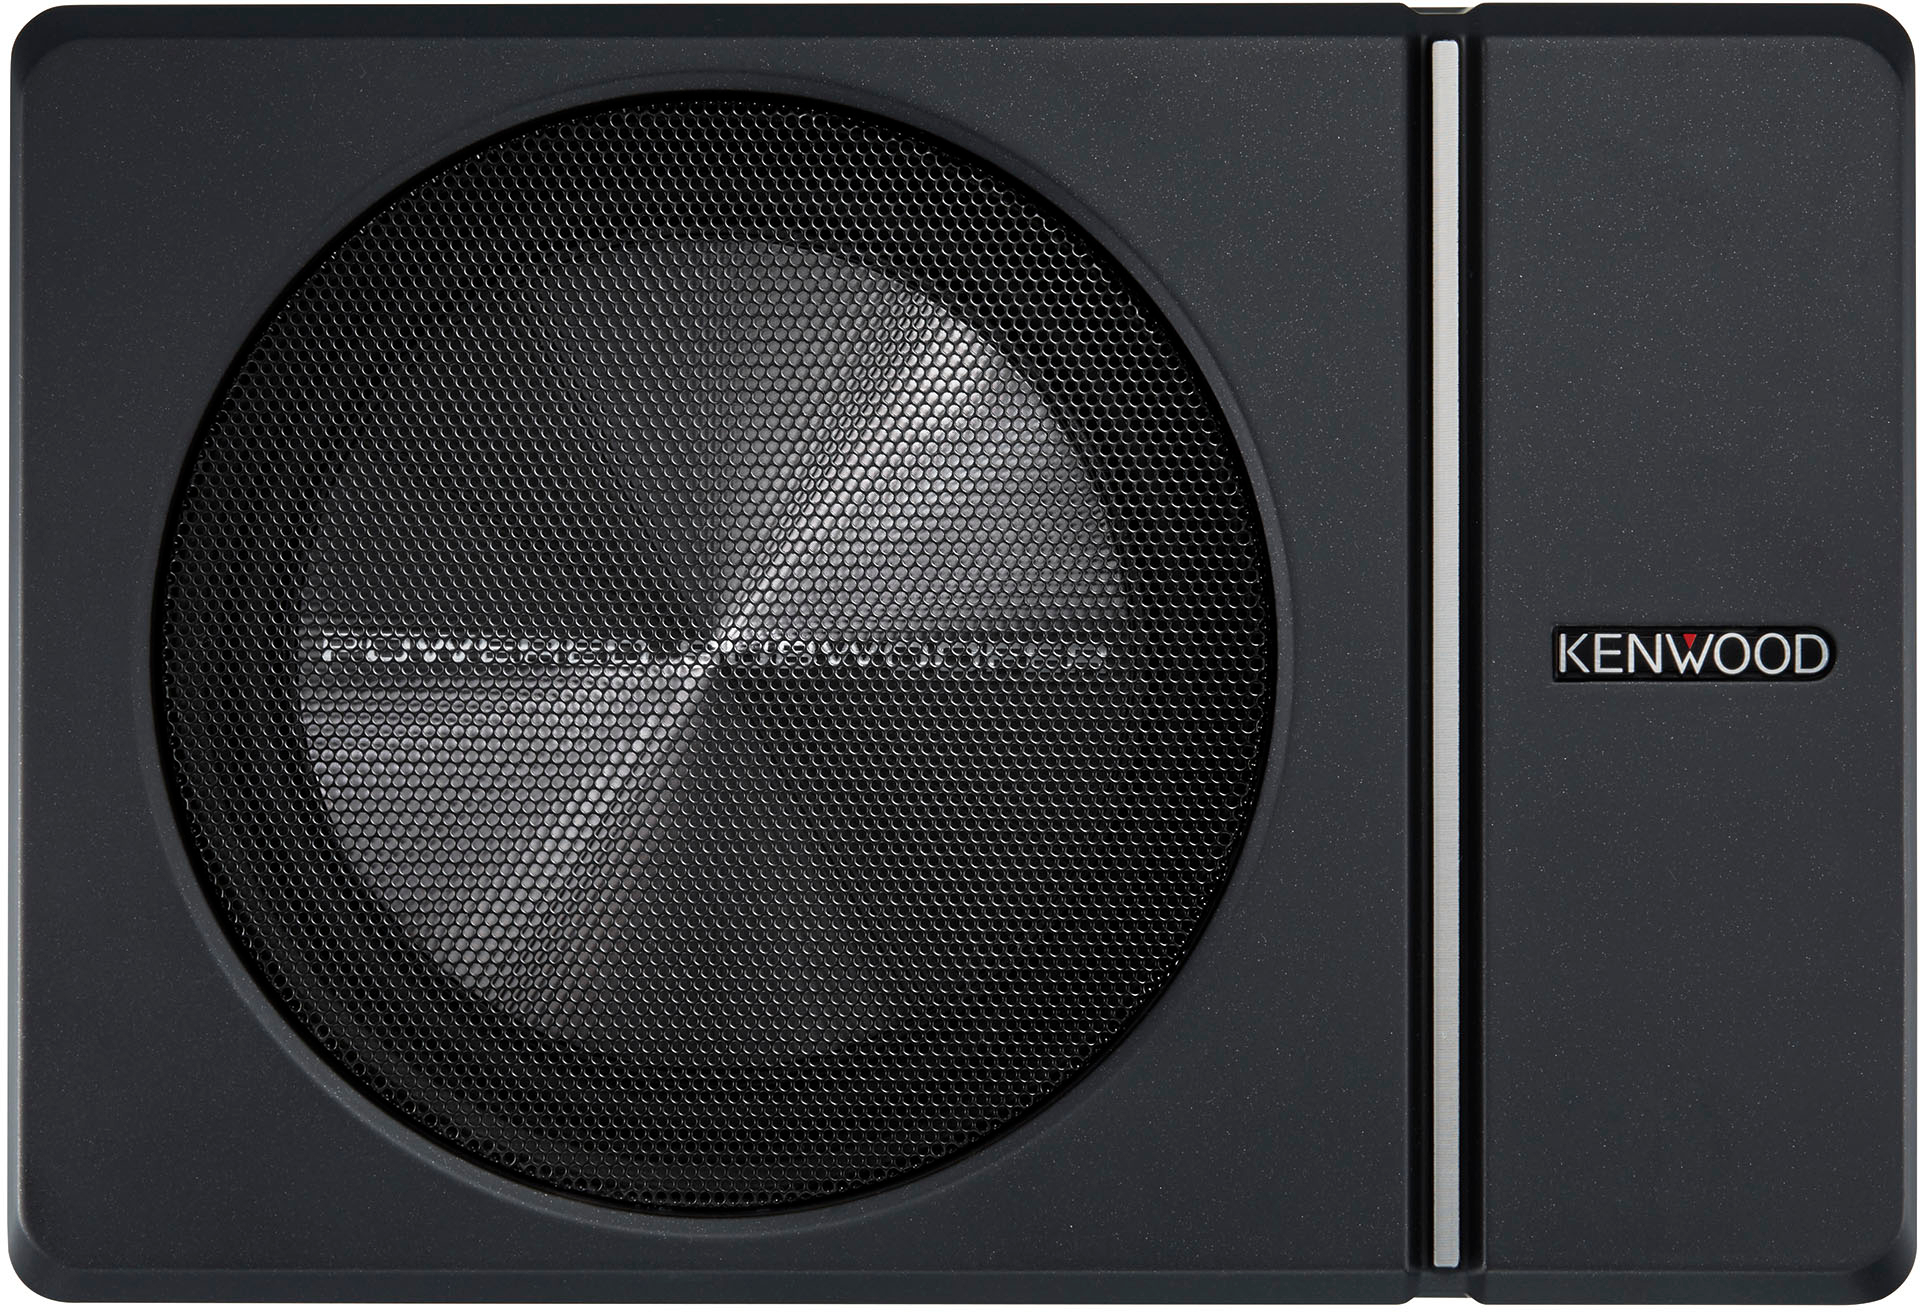 Angle View: KENWOOD -Compact 8" Subwoofer with Enclosure and integrated 250W Amplifier - Black